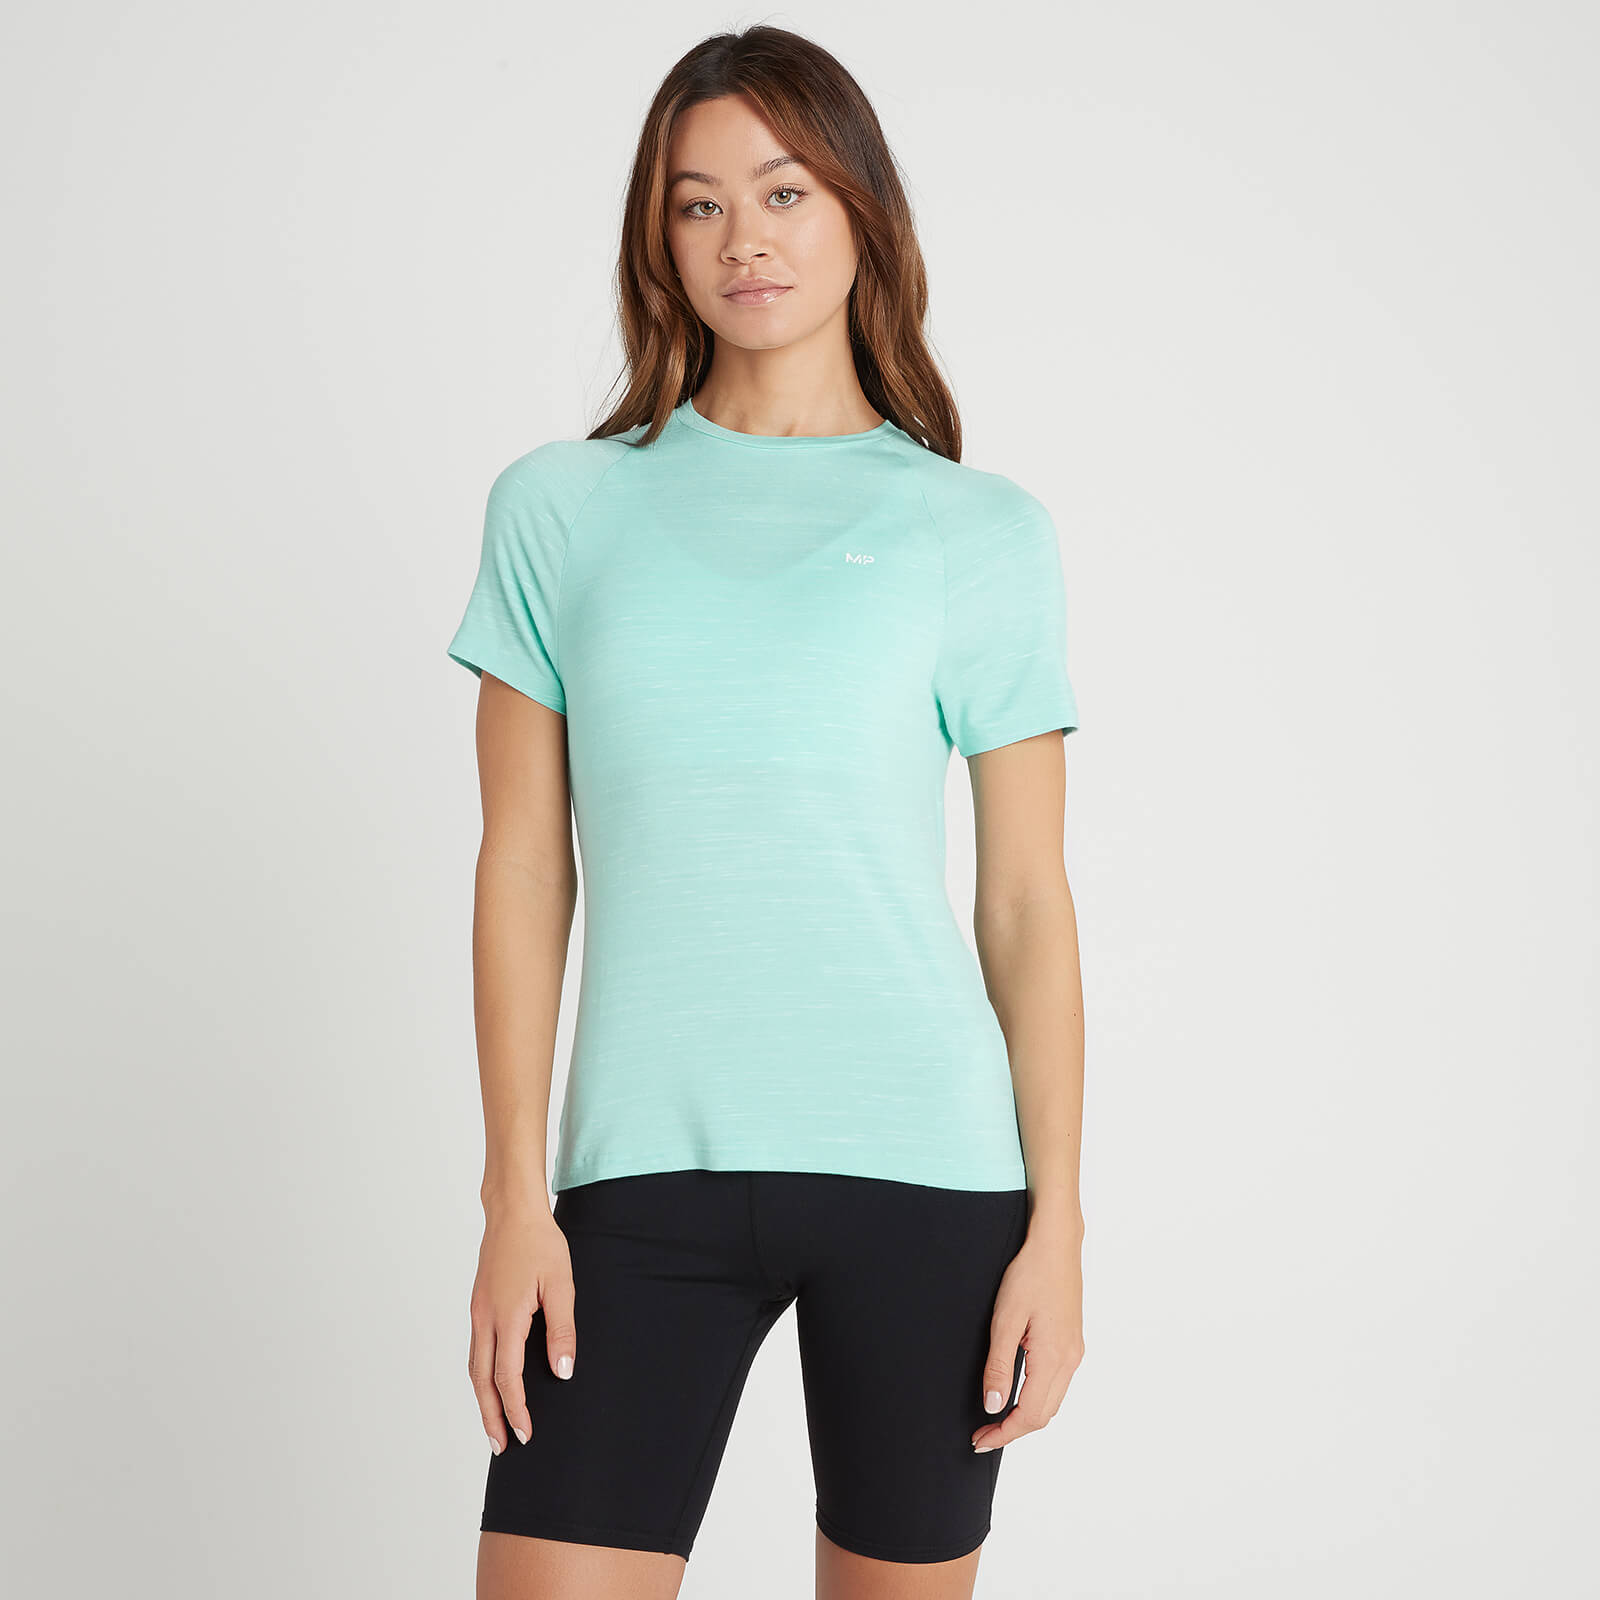 MP Women's Performance Training T-Shirt - Arctic Blue Marl with White Fleck - XS